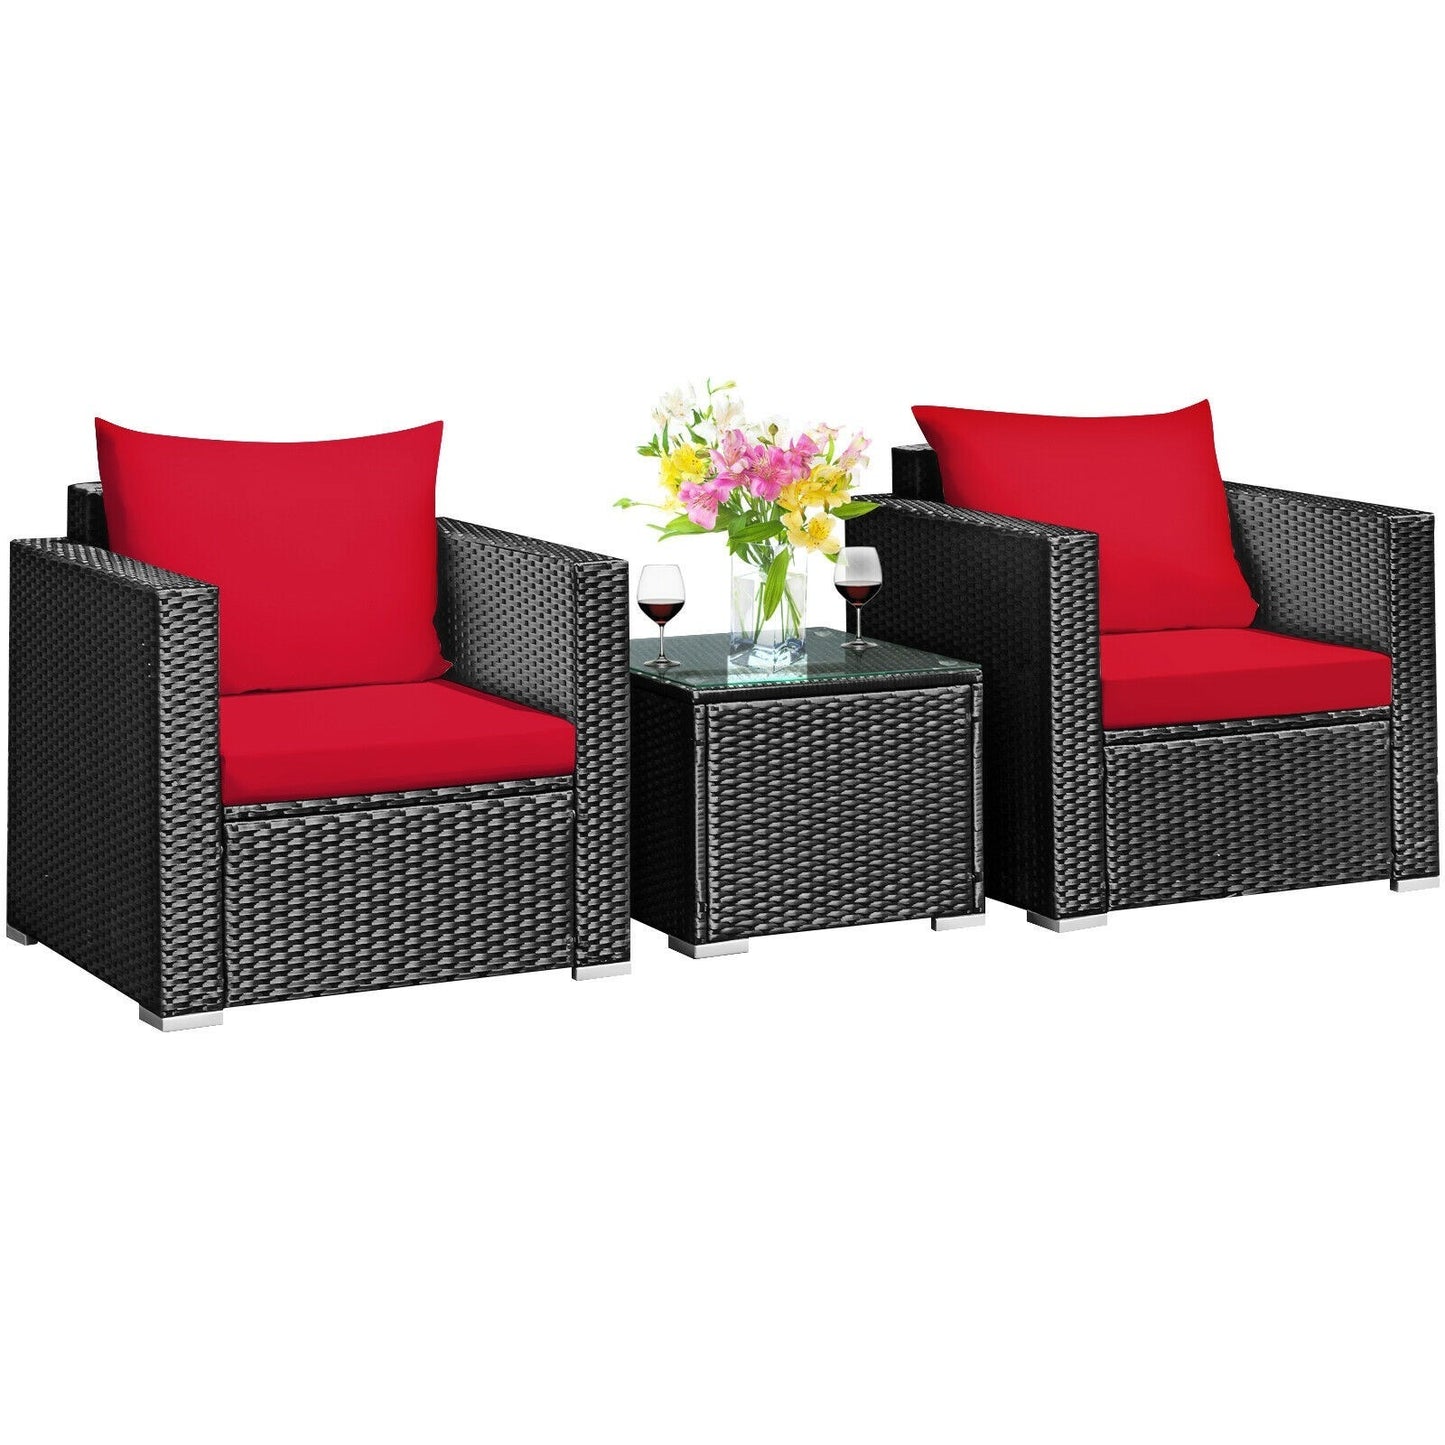 3 Pcs Patio wicker Furniture Set with Cushion